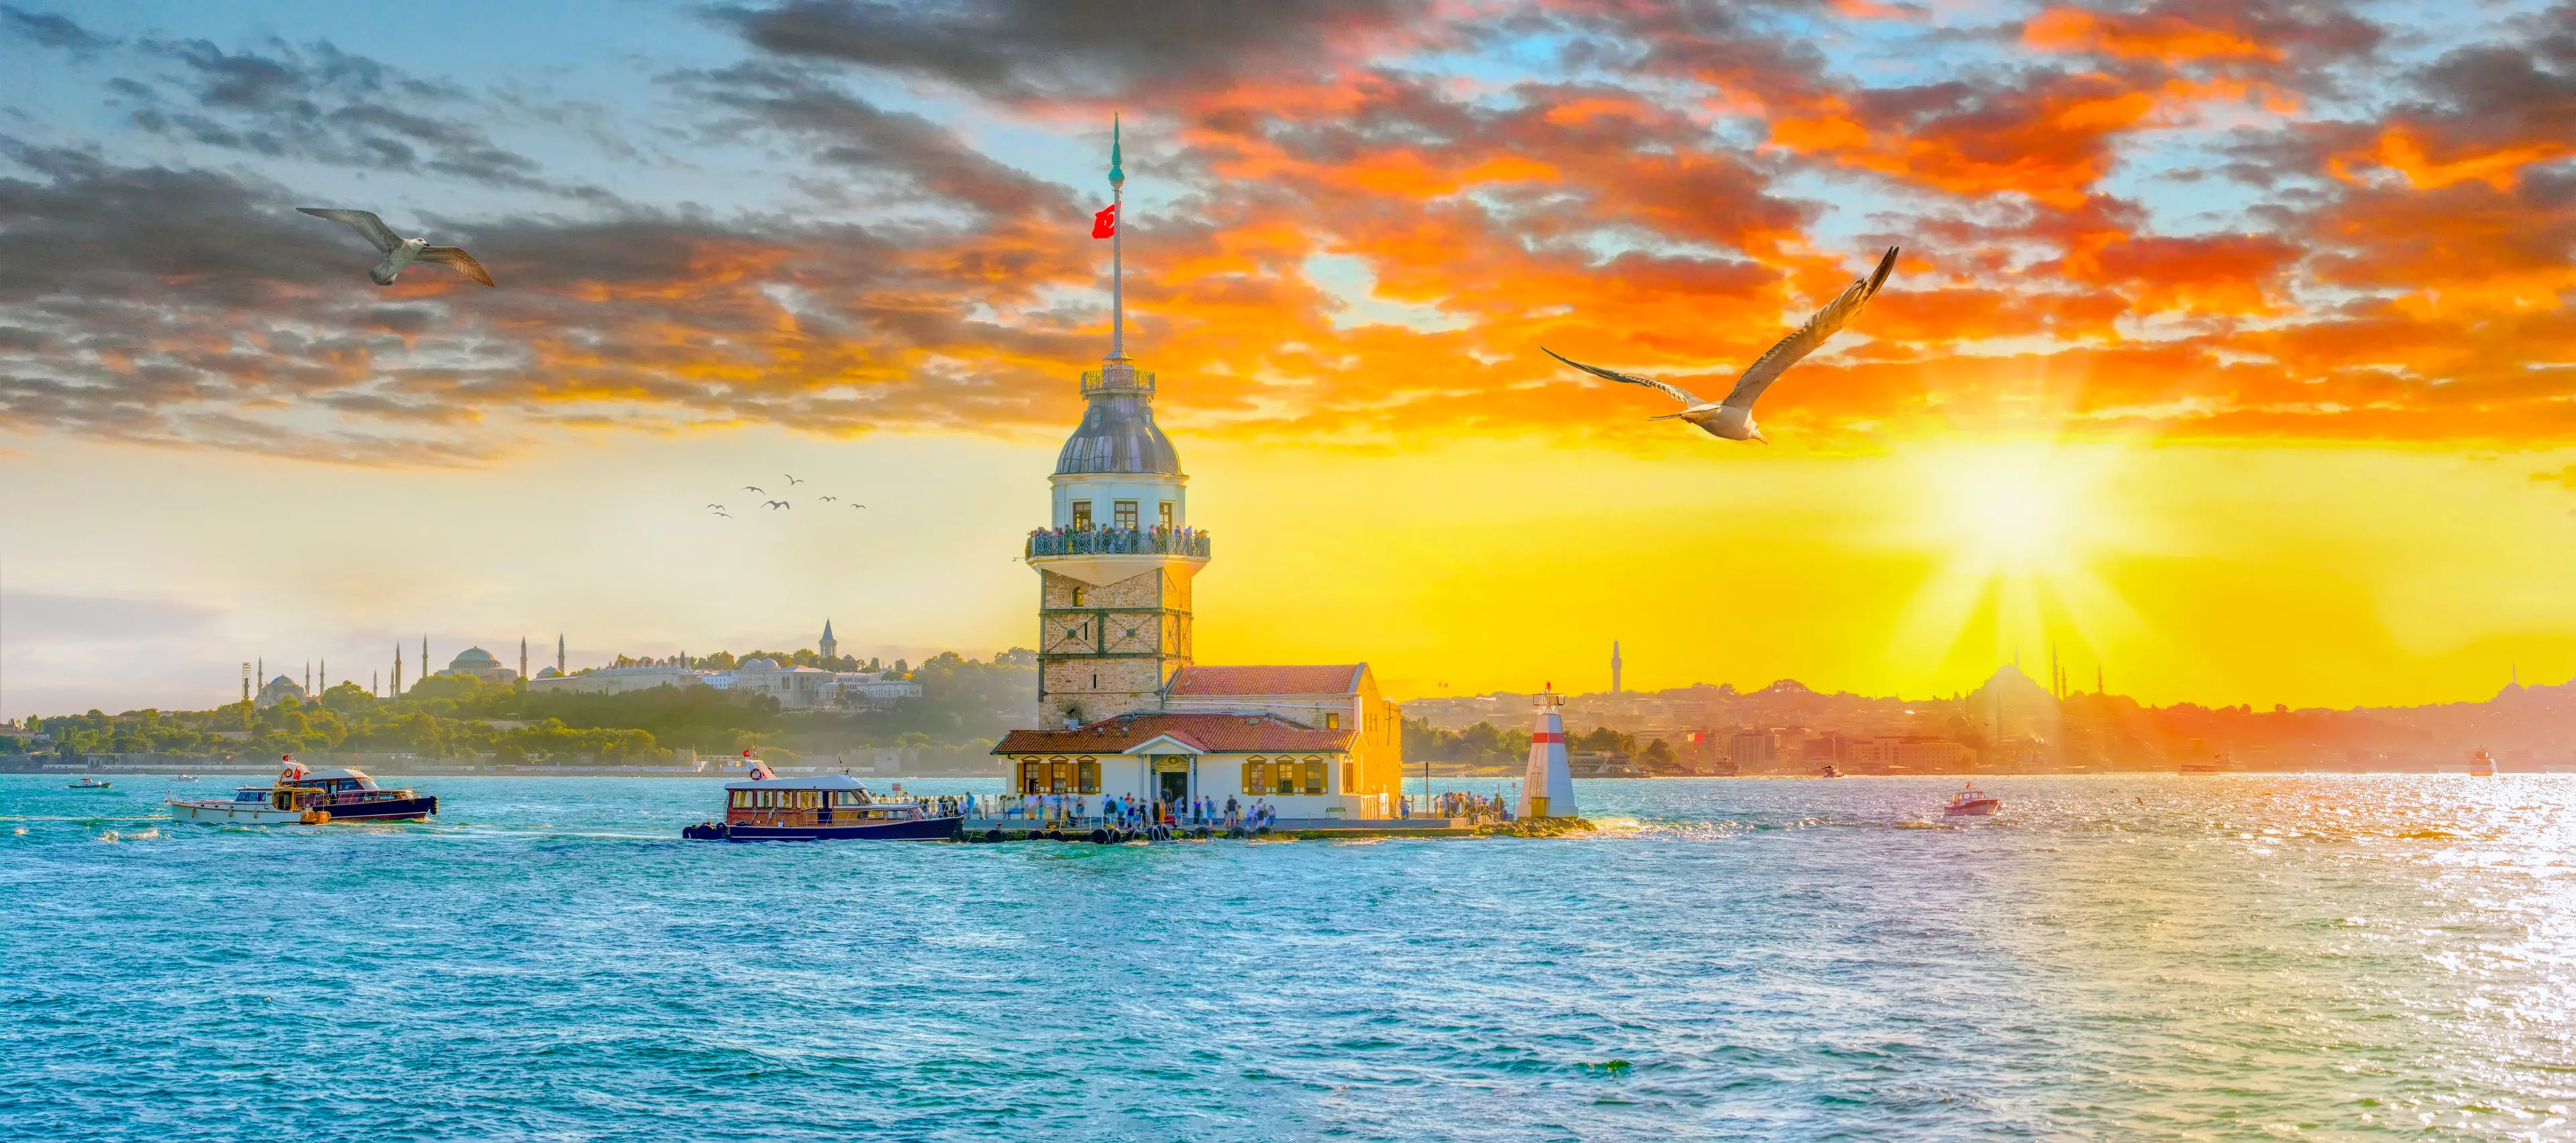 2-Day Istanbul Adventure: Outdoor Activities and Nightlife with Friends